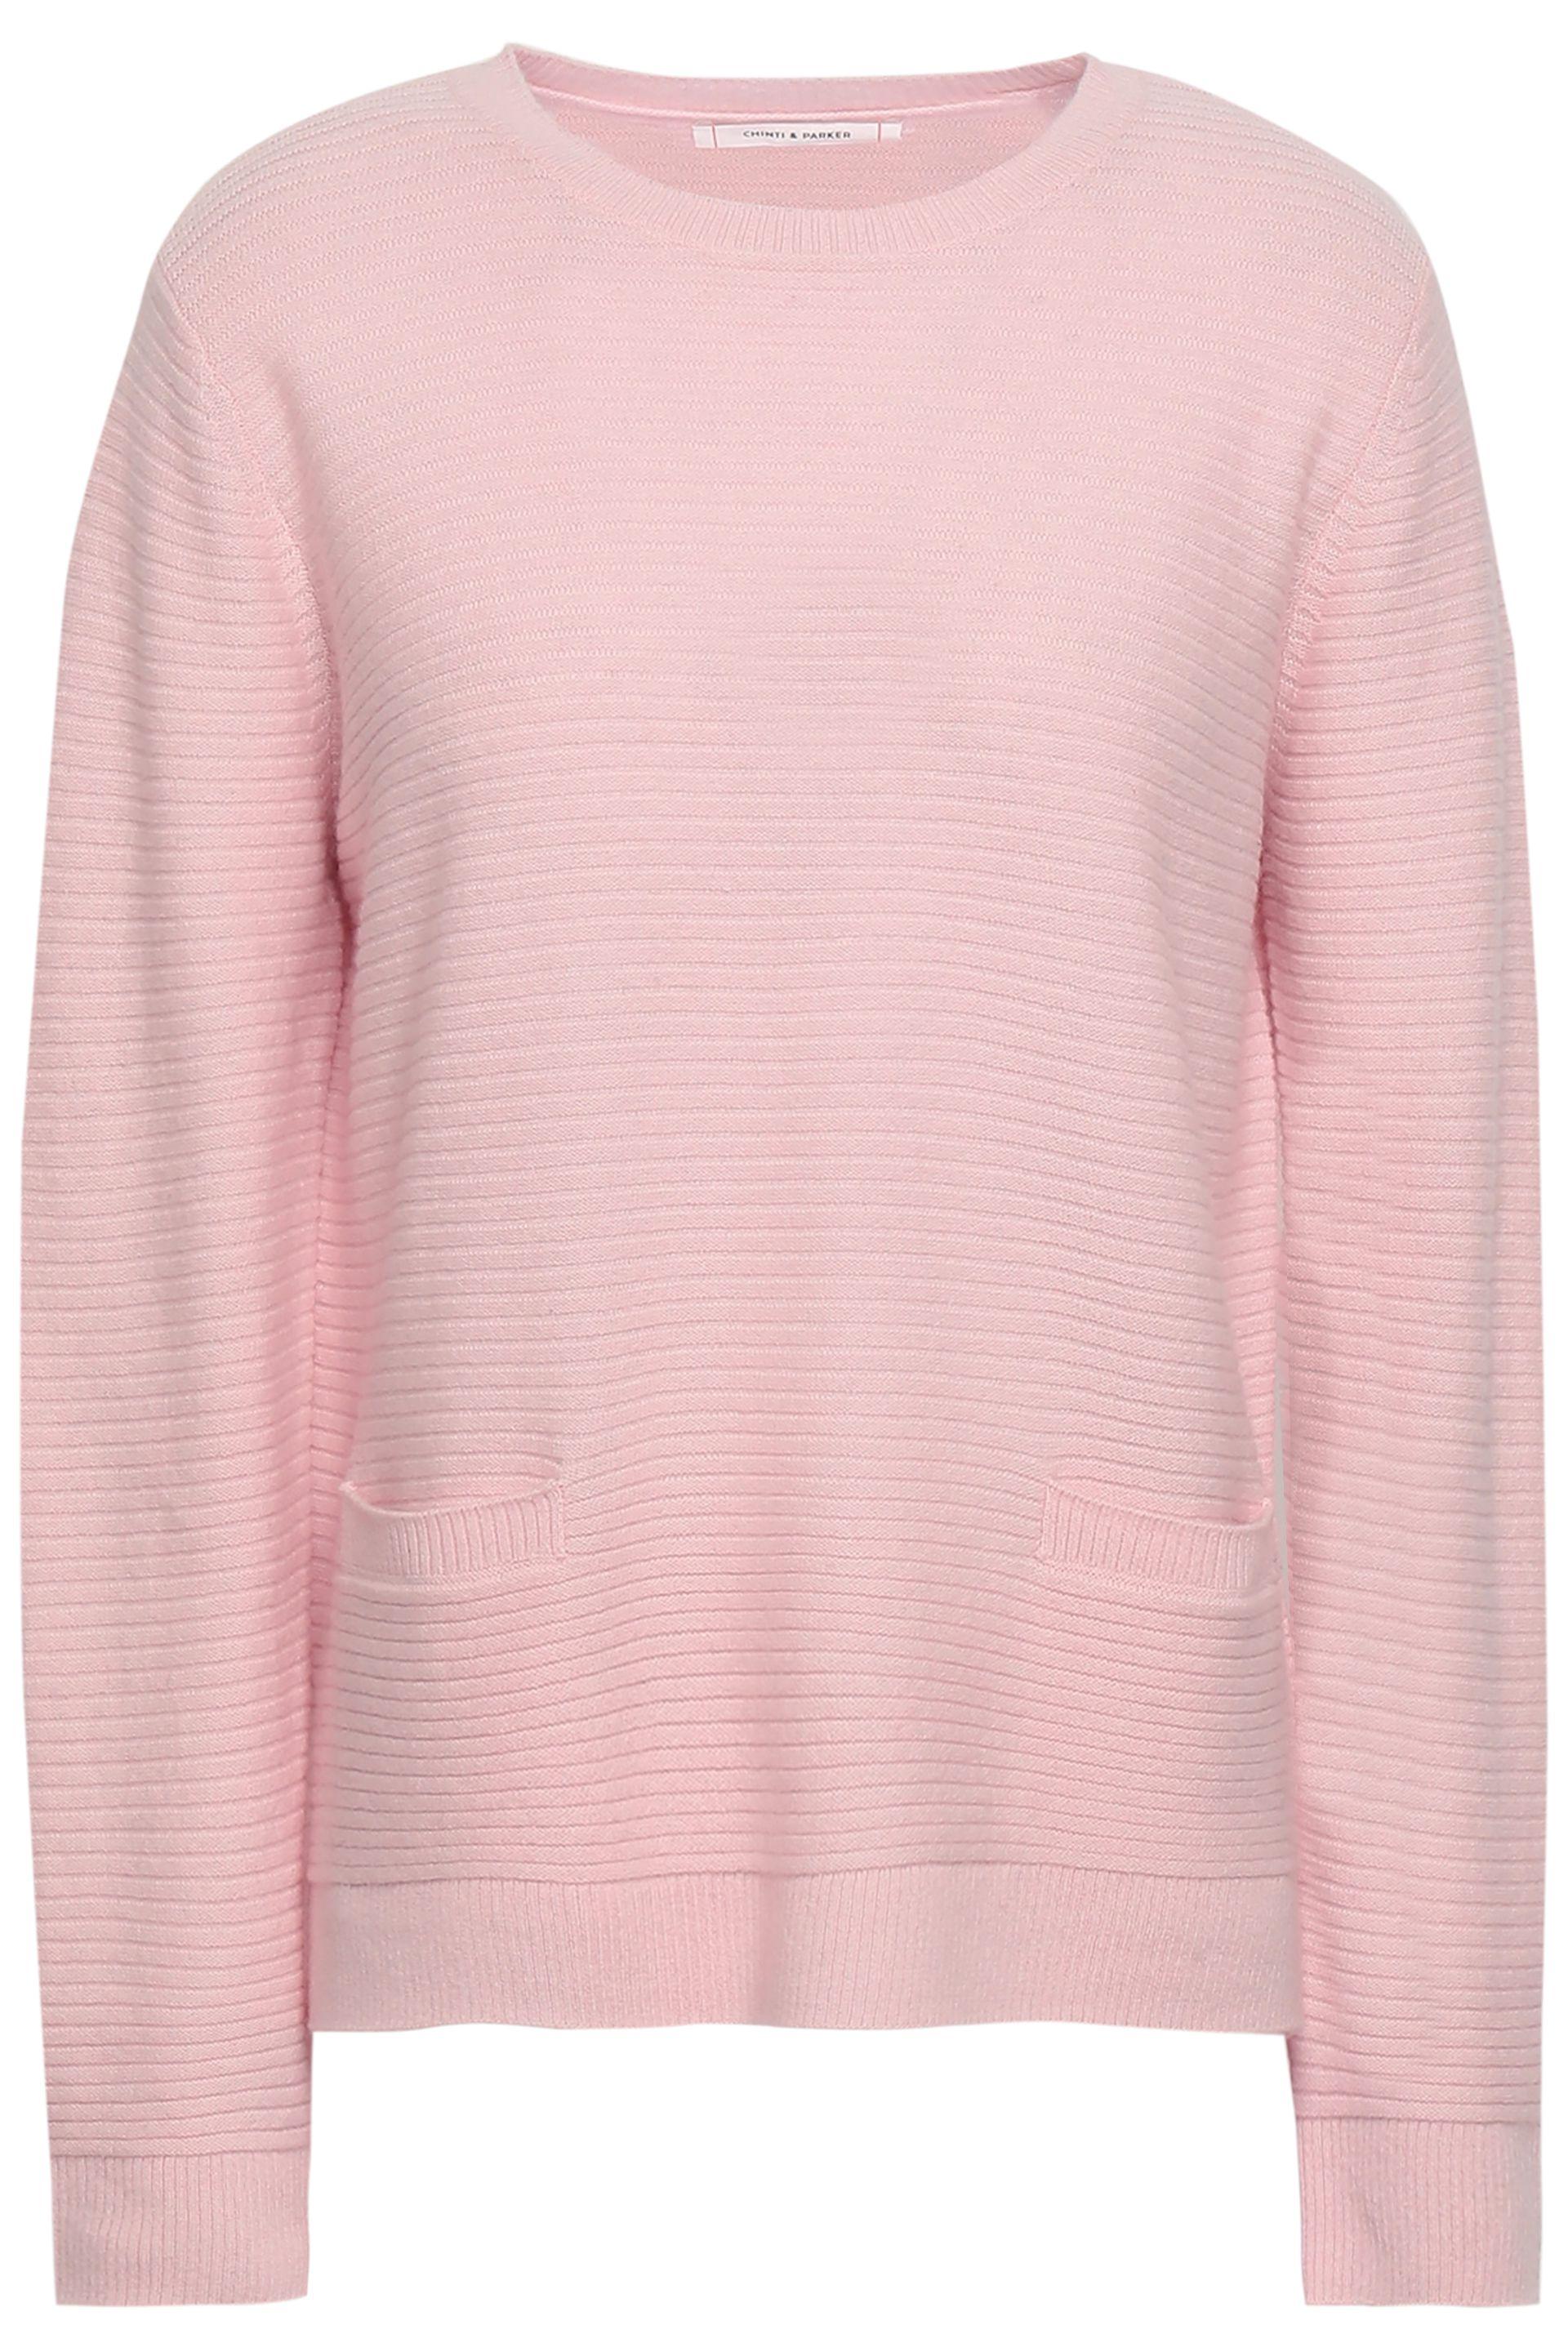 Chinti & Parker Ribbed Wool And Cashmere-blend Sweater Baby Pink - Lyst